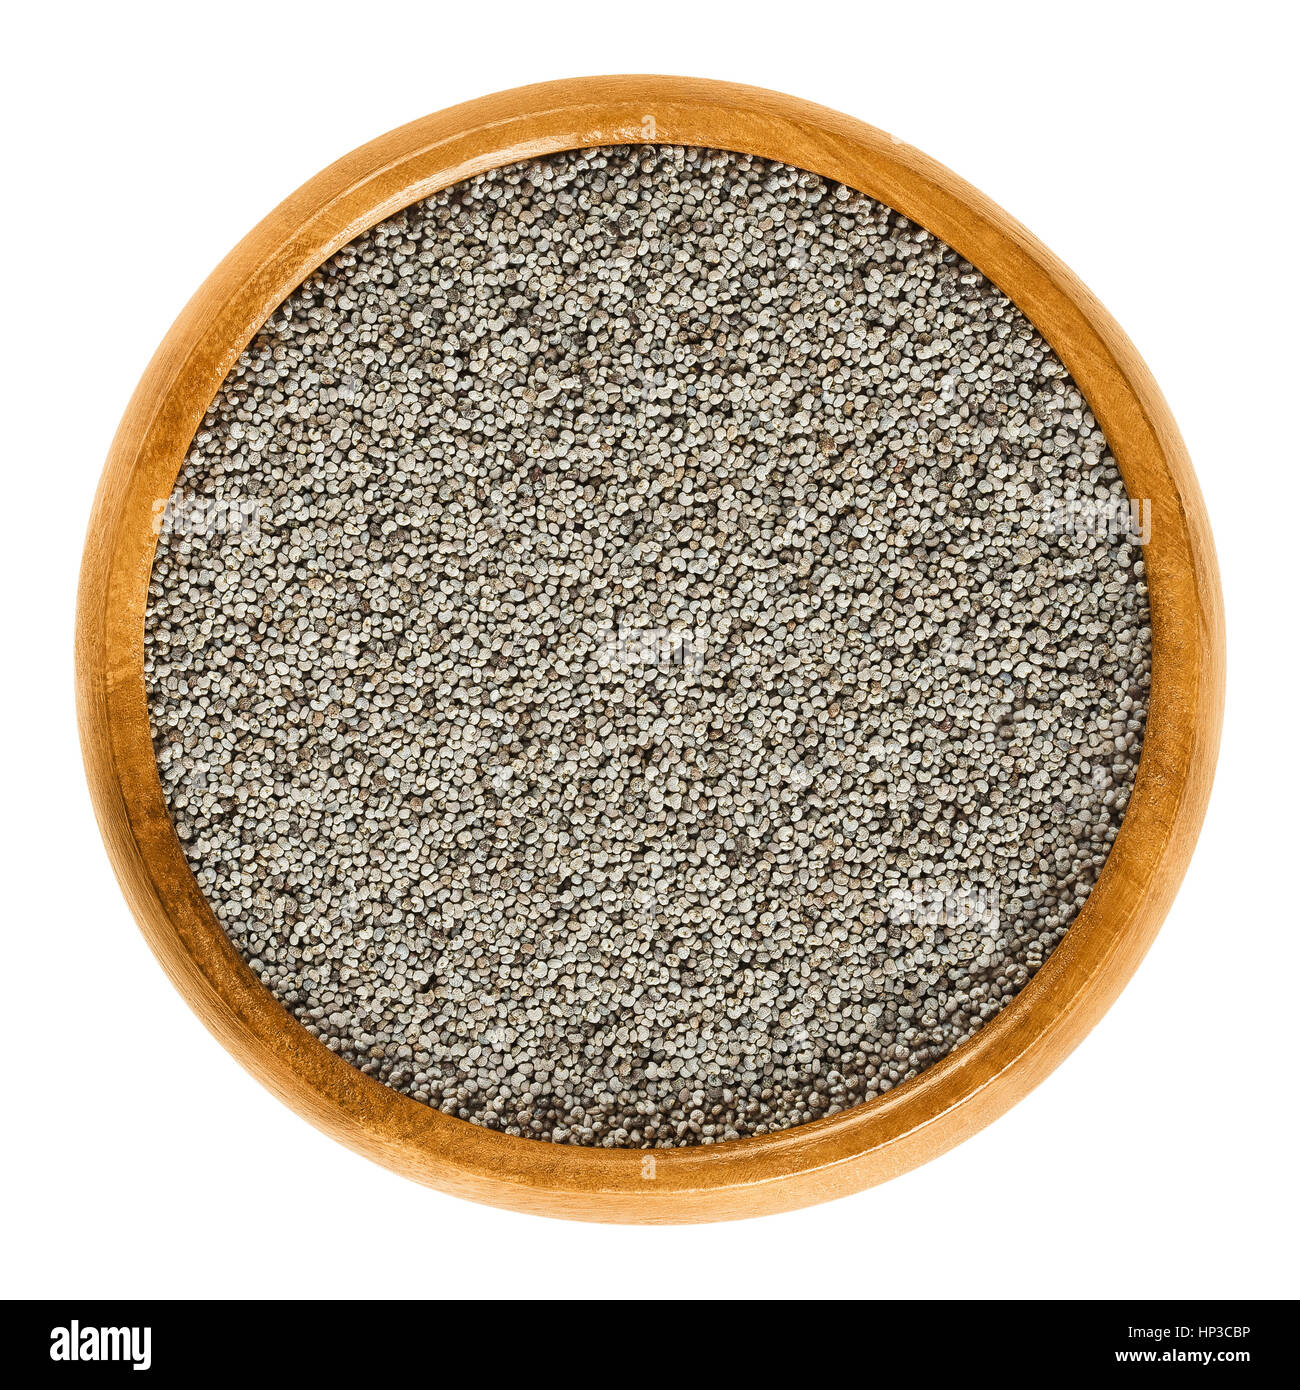 Gray poppy seeds in wooden bowl. Oilseed from opium poppy Paper somniferum with tiny kidney shaped seeds. Stock Photo